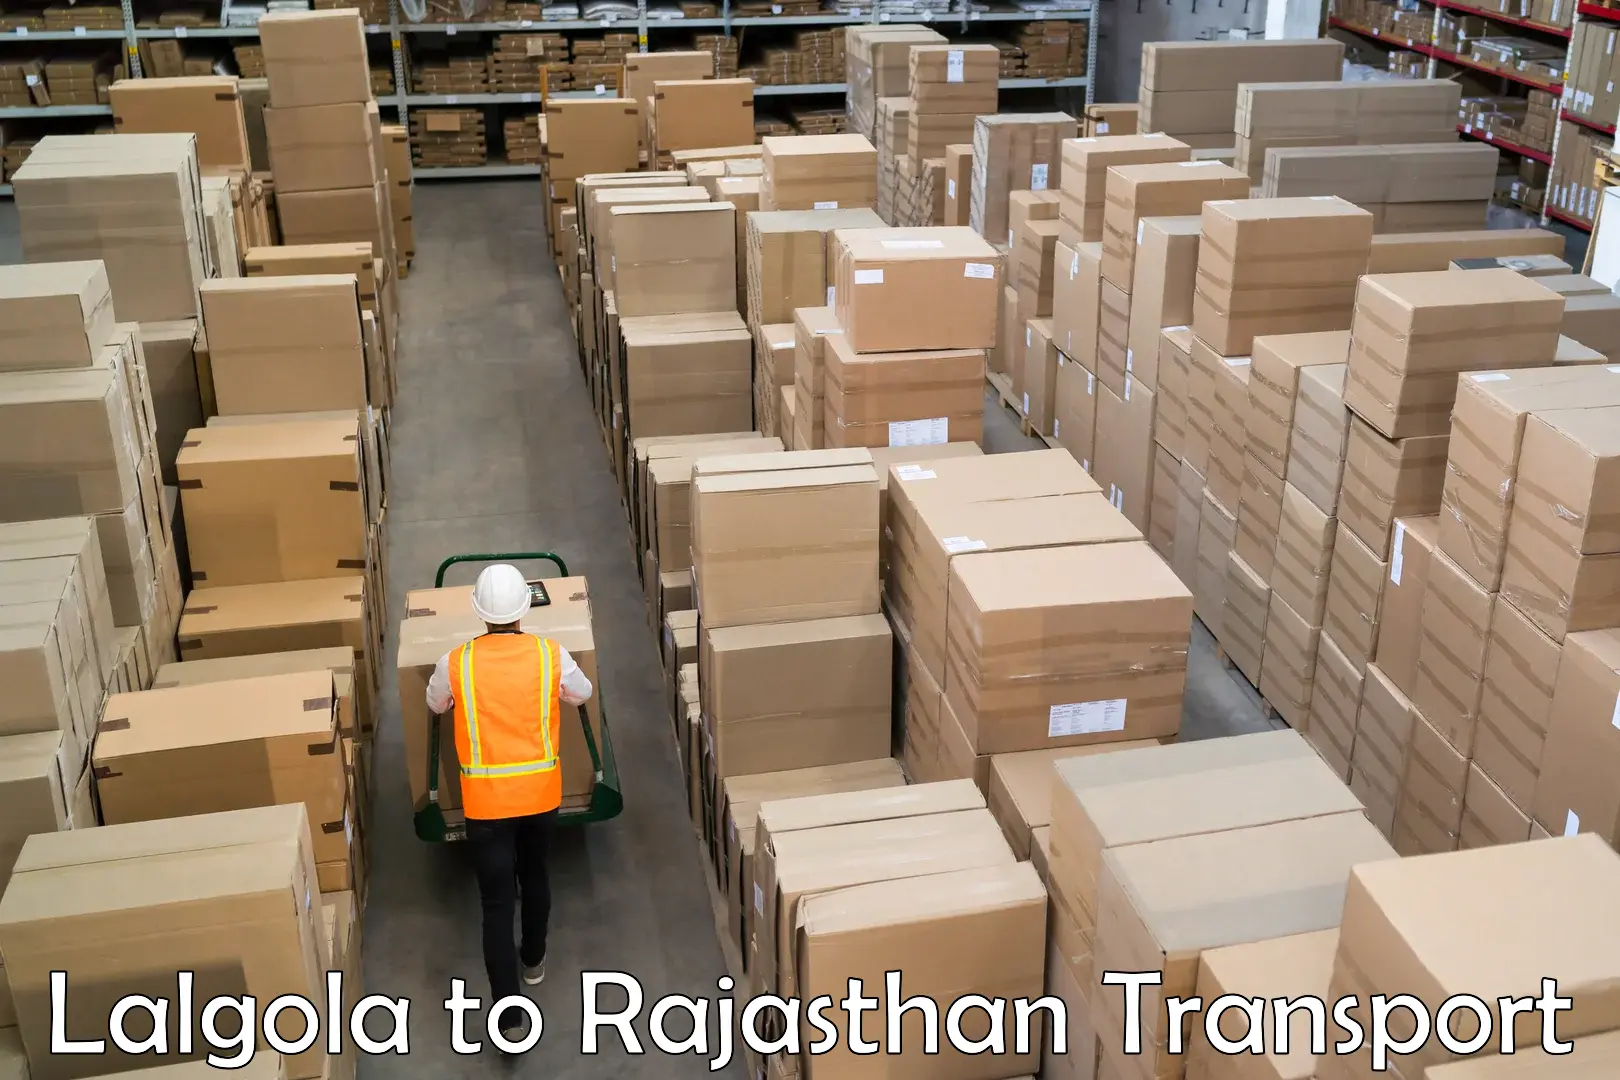 Truck transport companies in India Lalgola to Udaipur